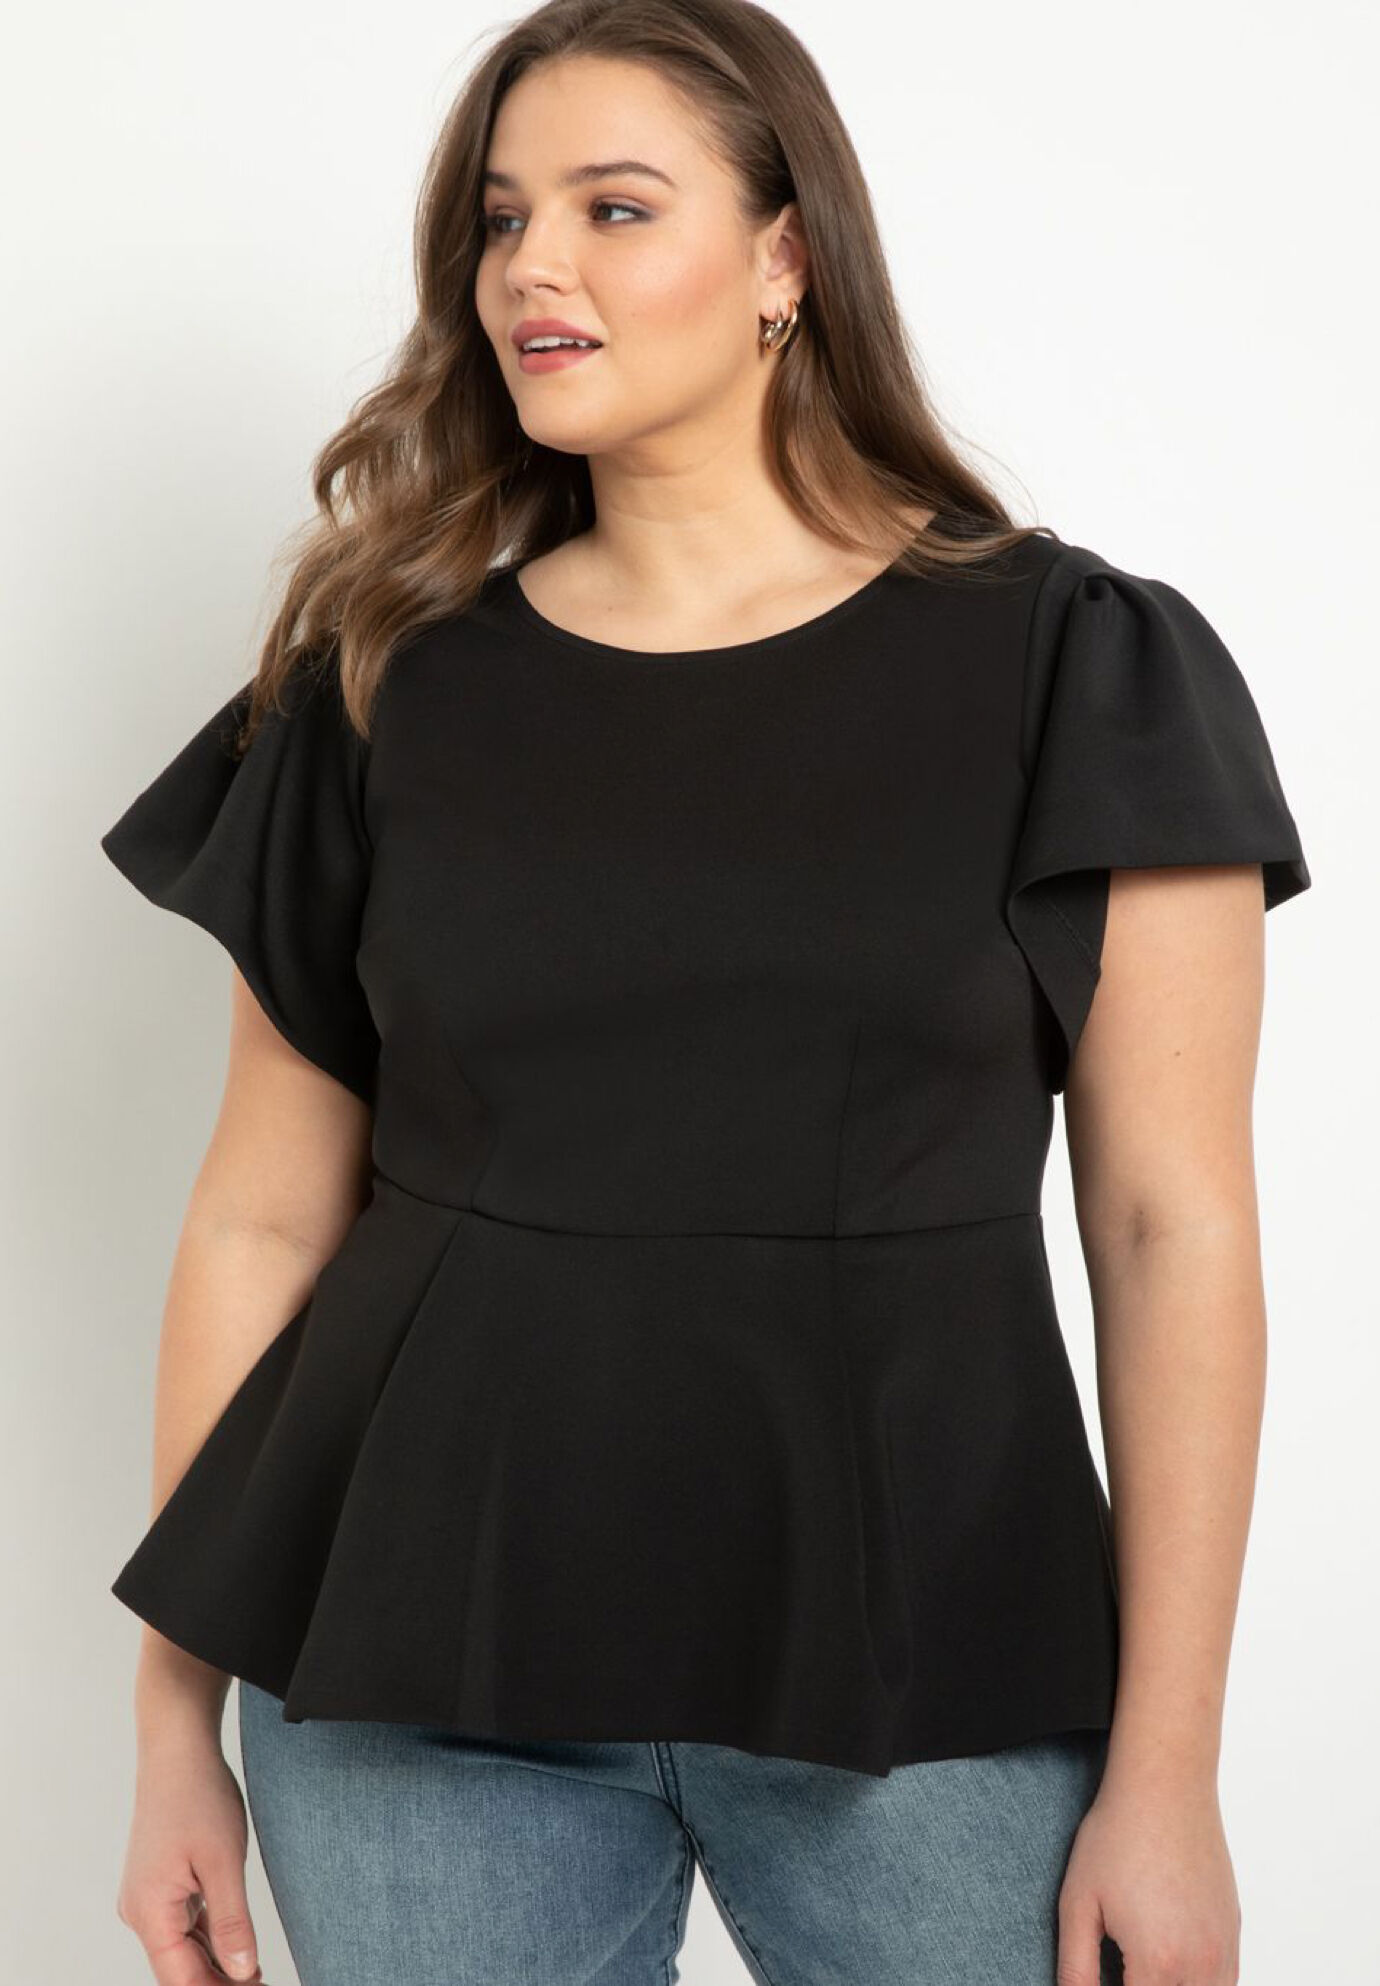 The Early Aughts Peplum Silhouette Is Perfectly Stylable In 2023